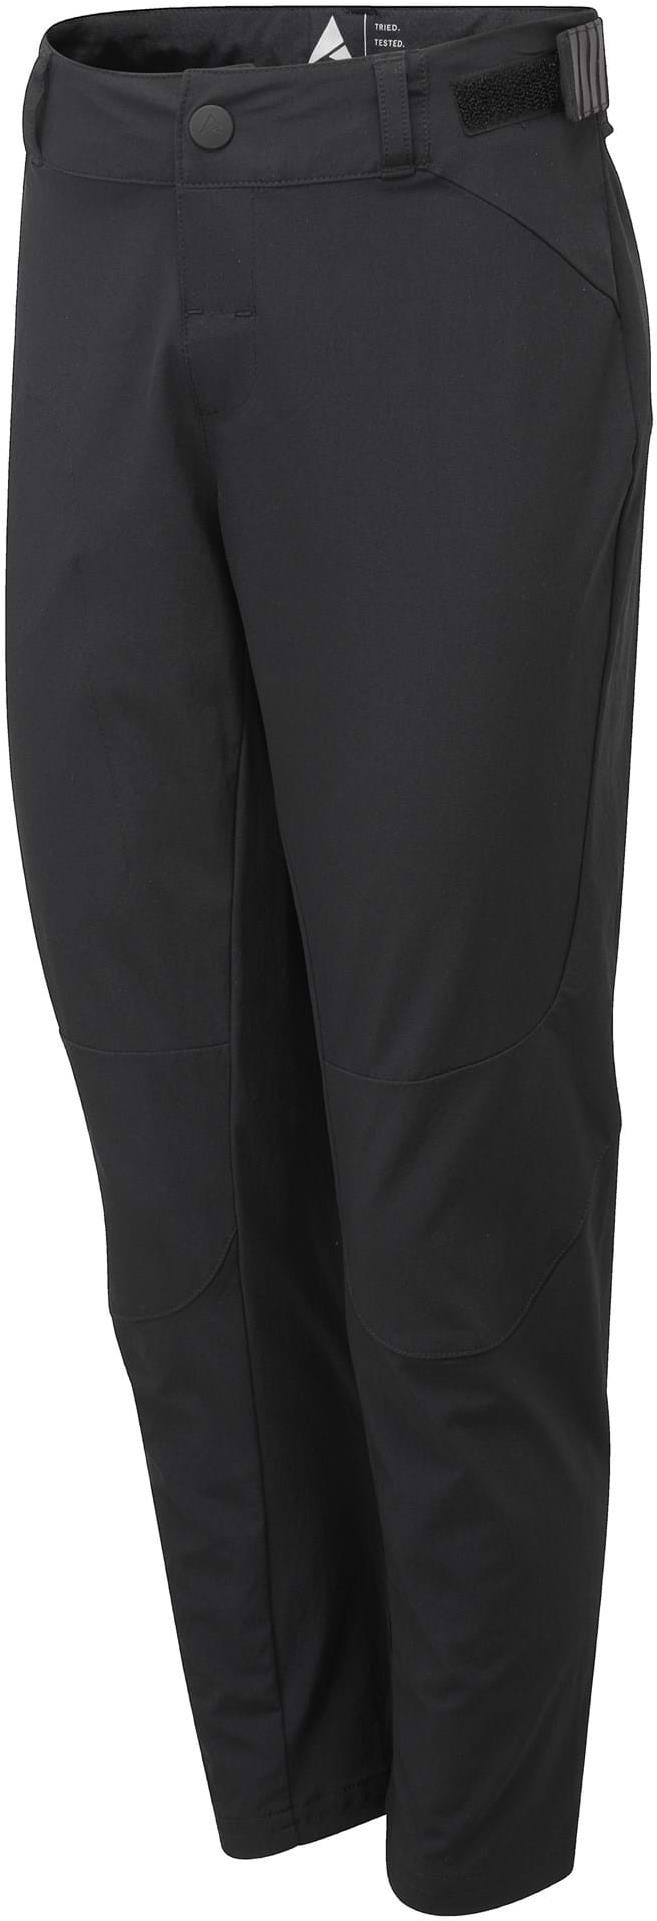 Spark Trail Kids Trousers image 0